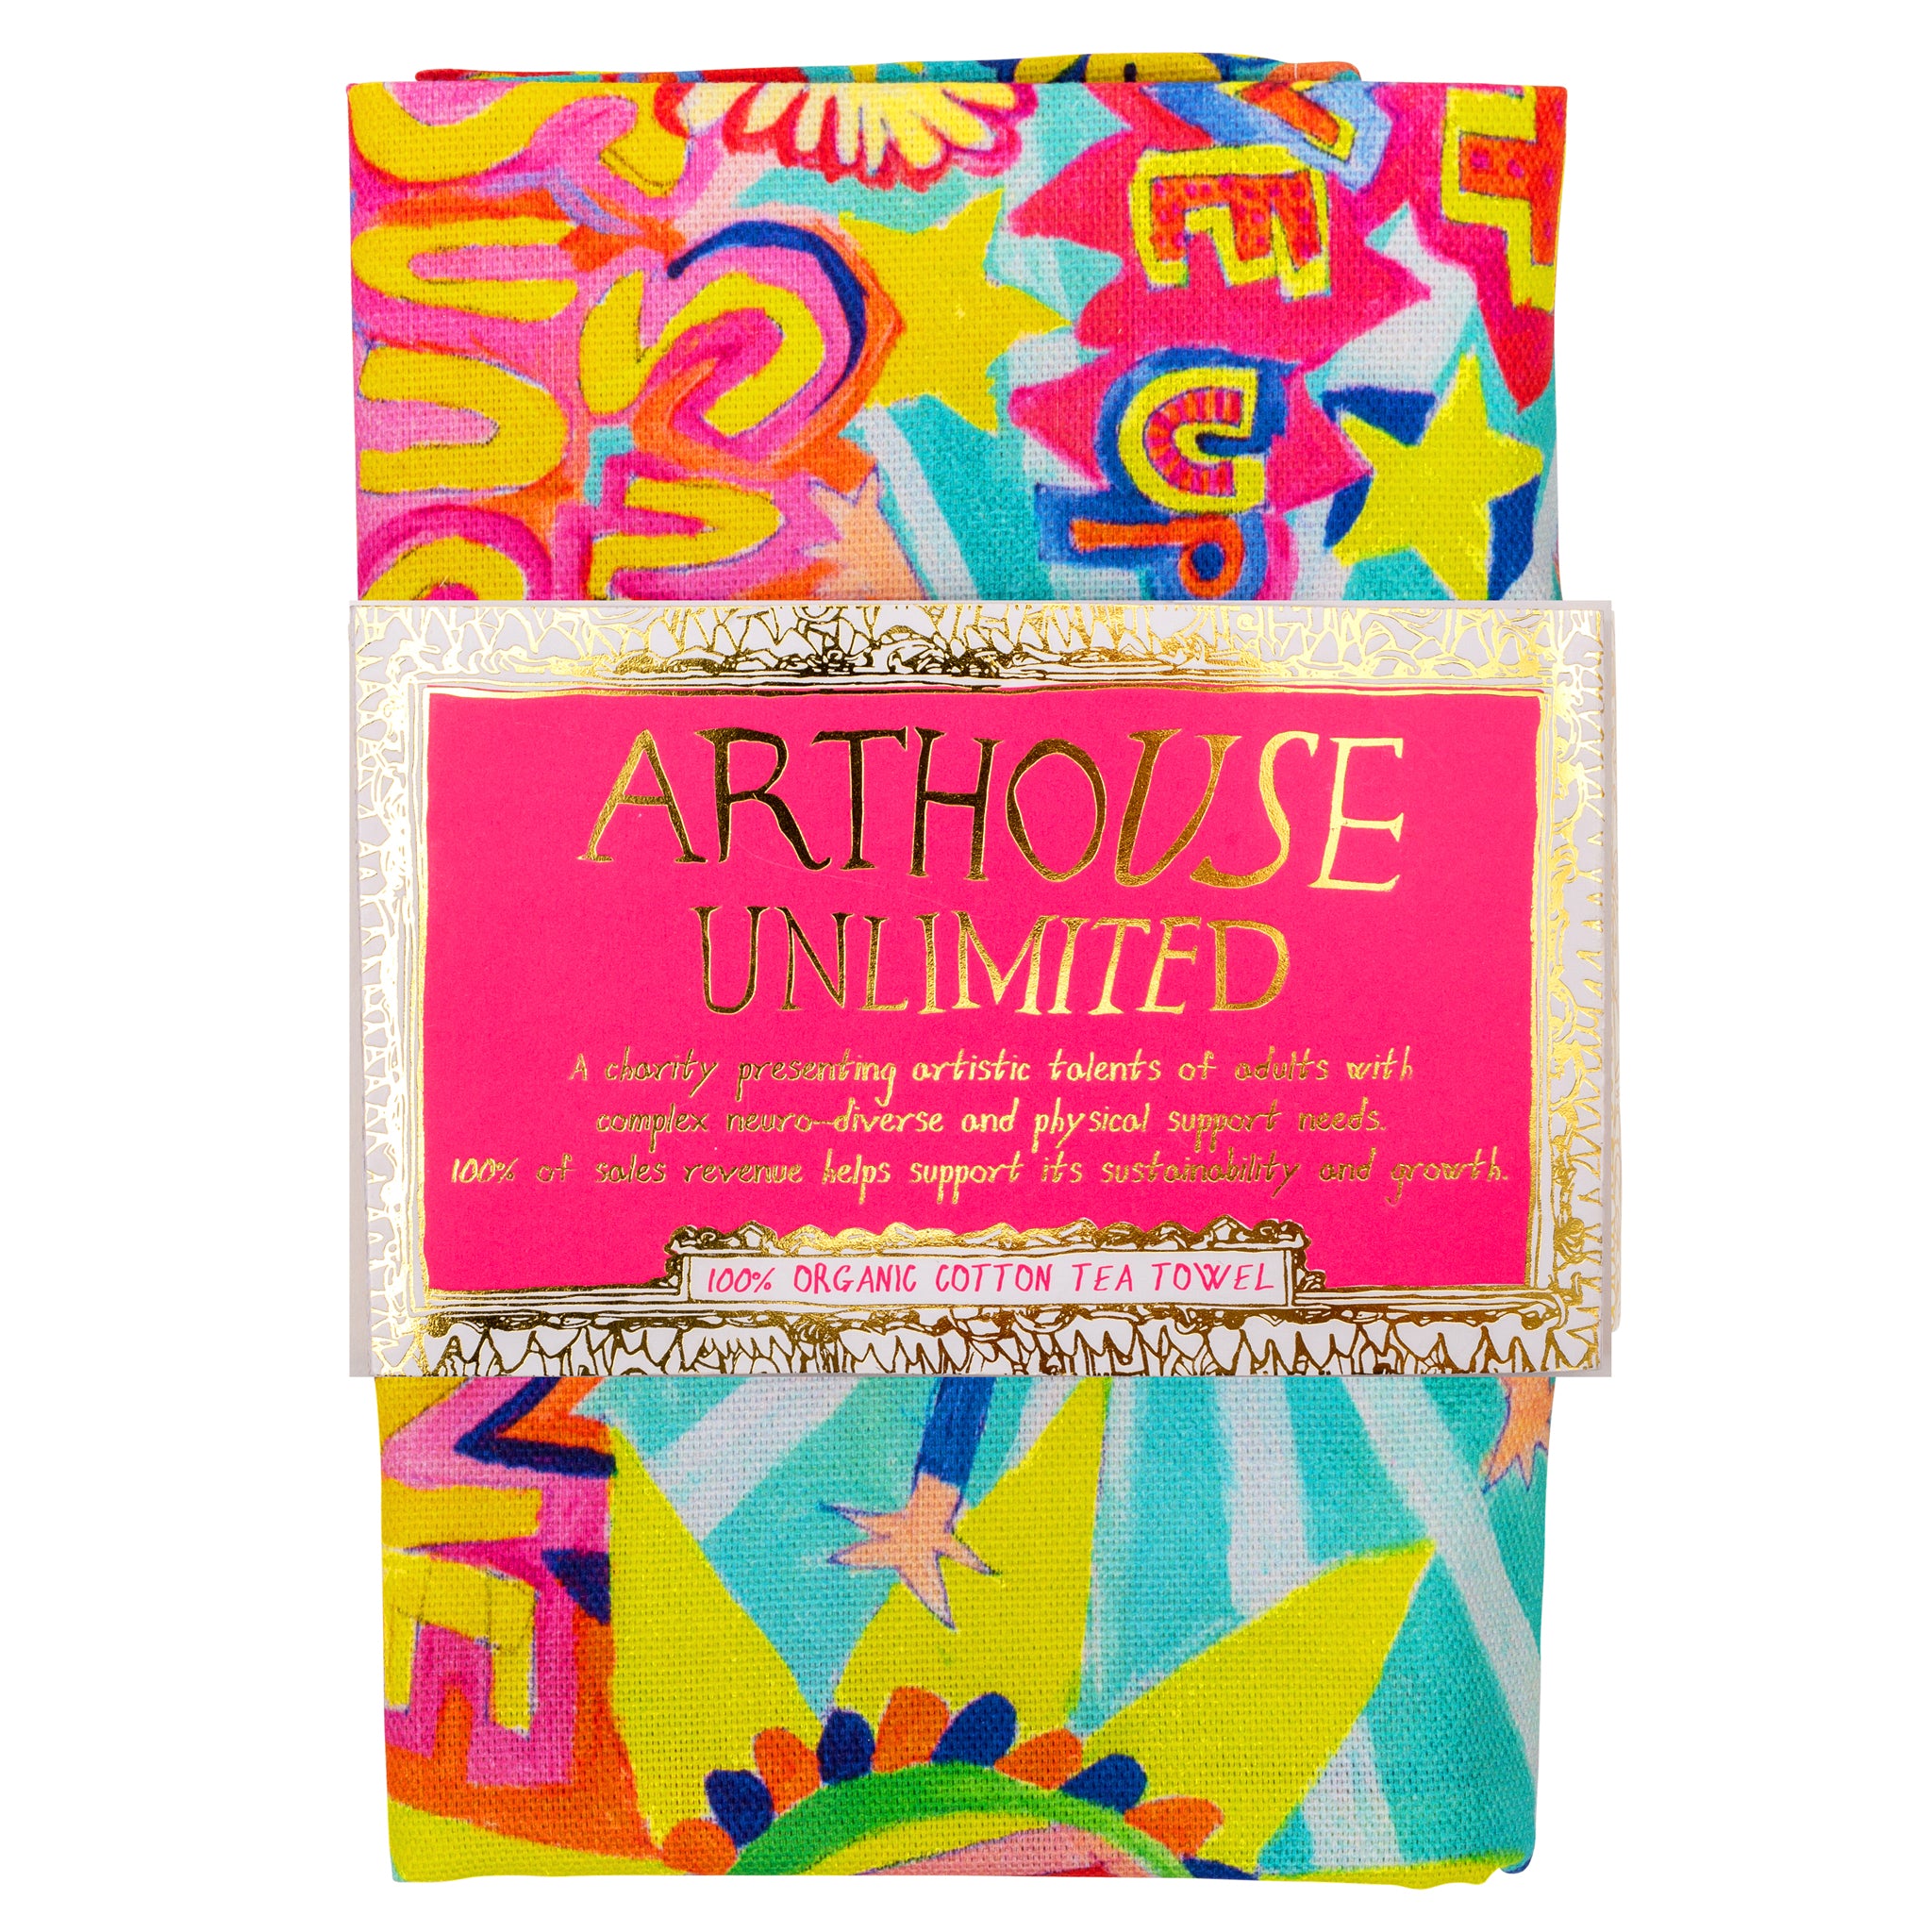 Bright coloured Full of Joy, 100% Organic Cotton Tea Towel with arthouse unlimited belly band 